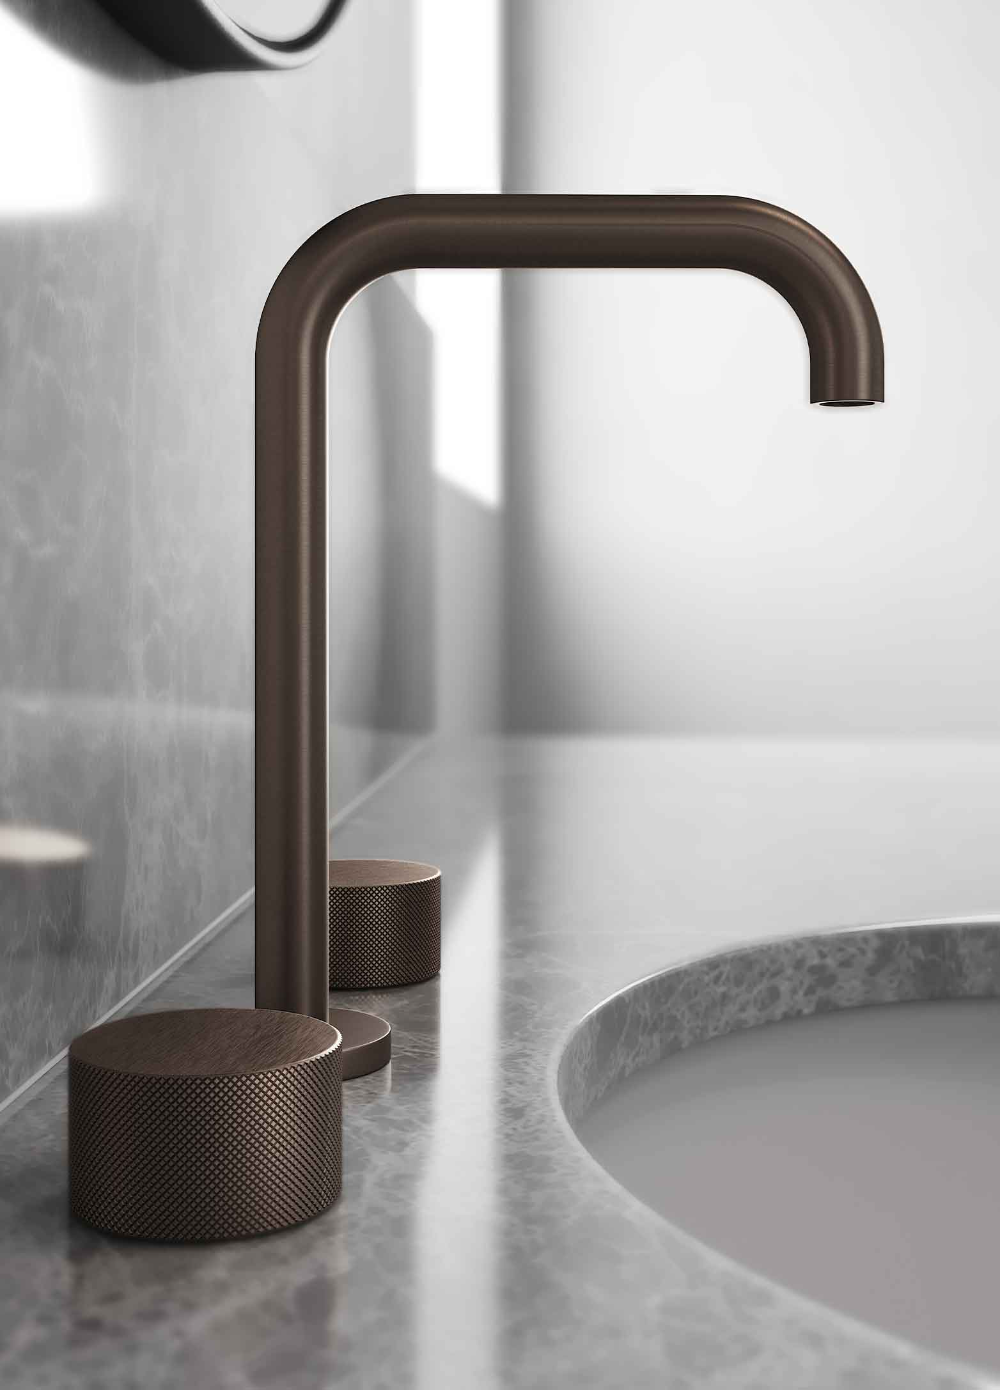 Kitchen Taps Selection Guide